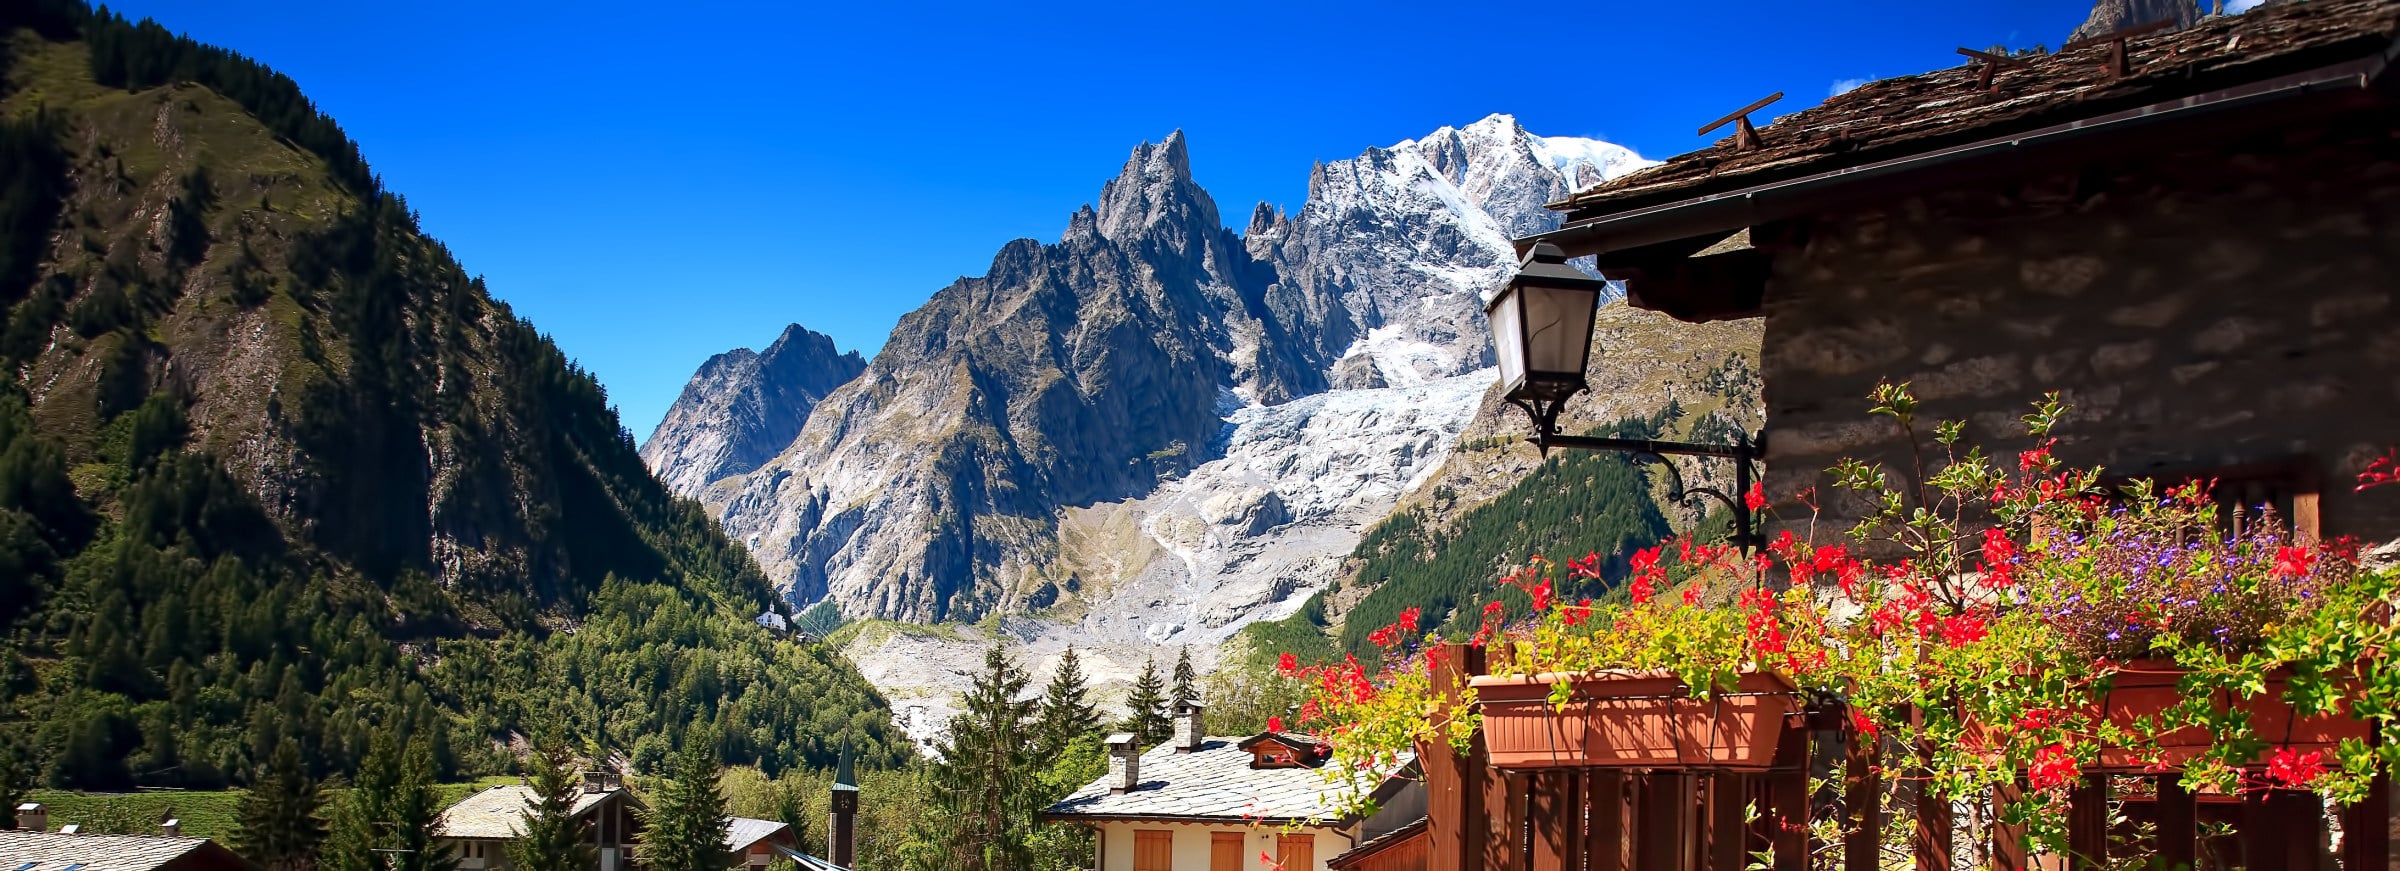 Monte Bianco and Courmayeur Day Trip from Milan